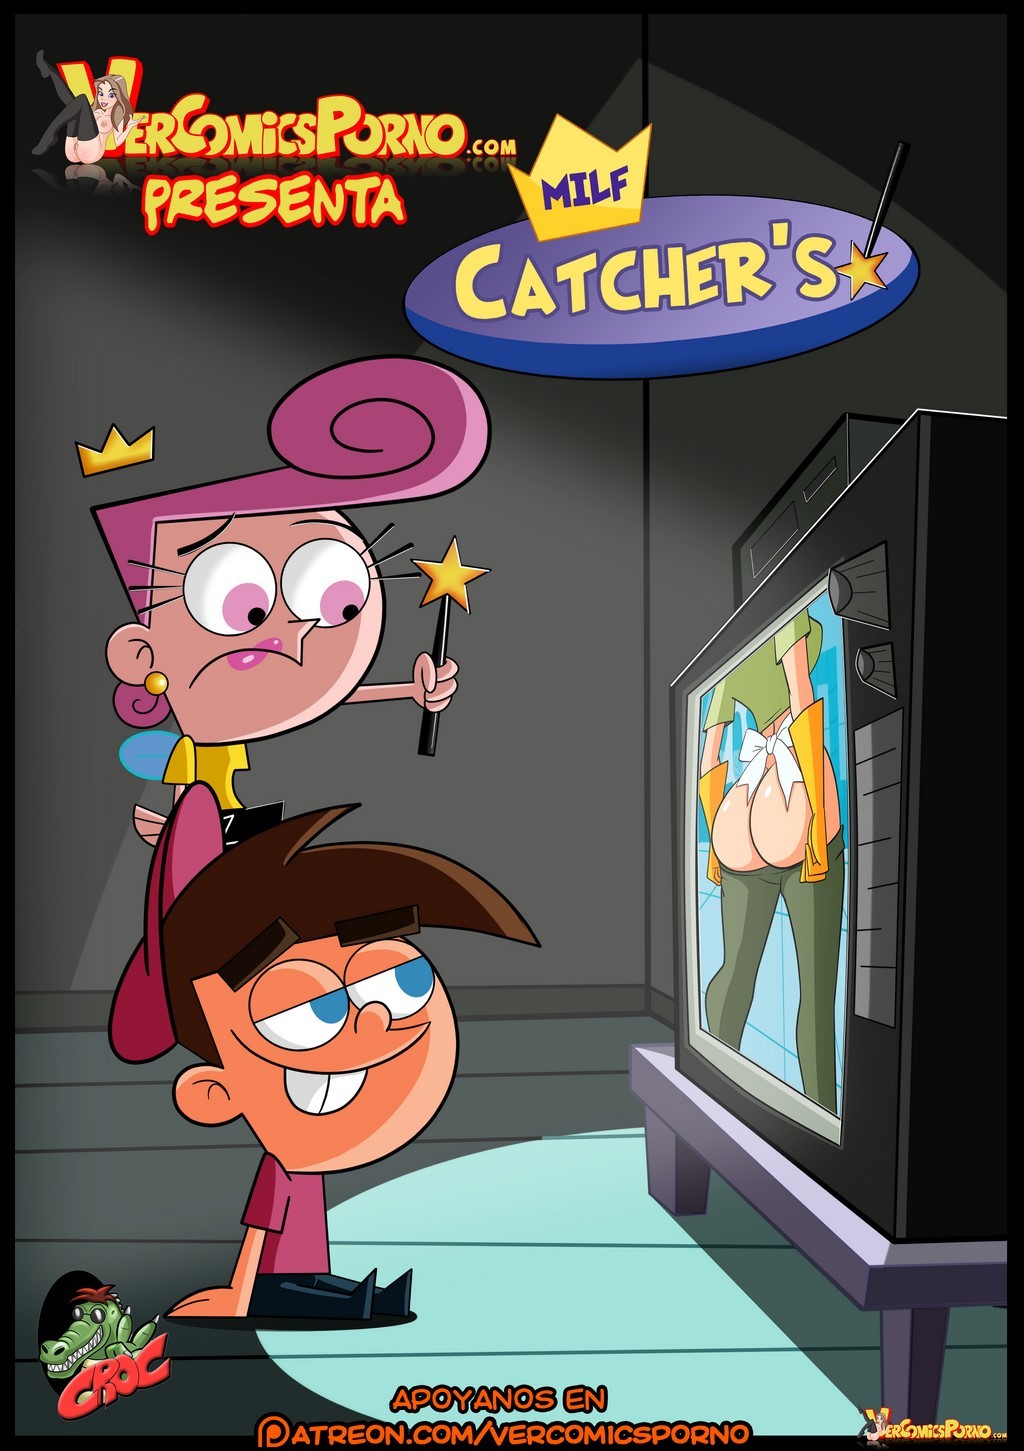 New comic by Croc - Milf Catchers - The Fairly OddParents - English - Ongoing